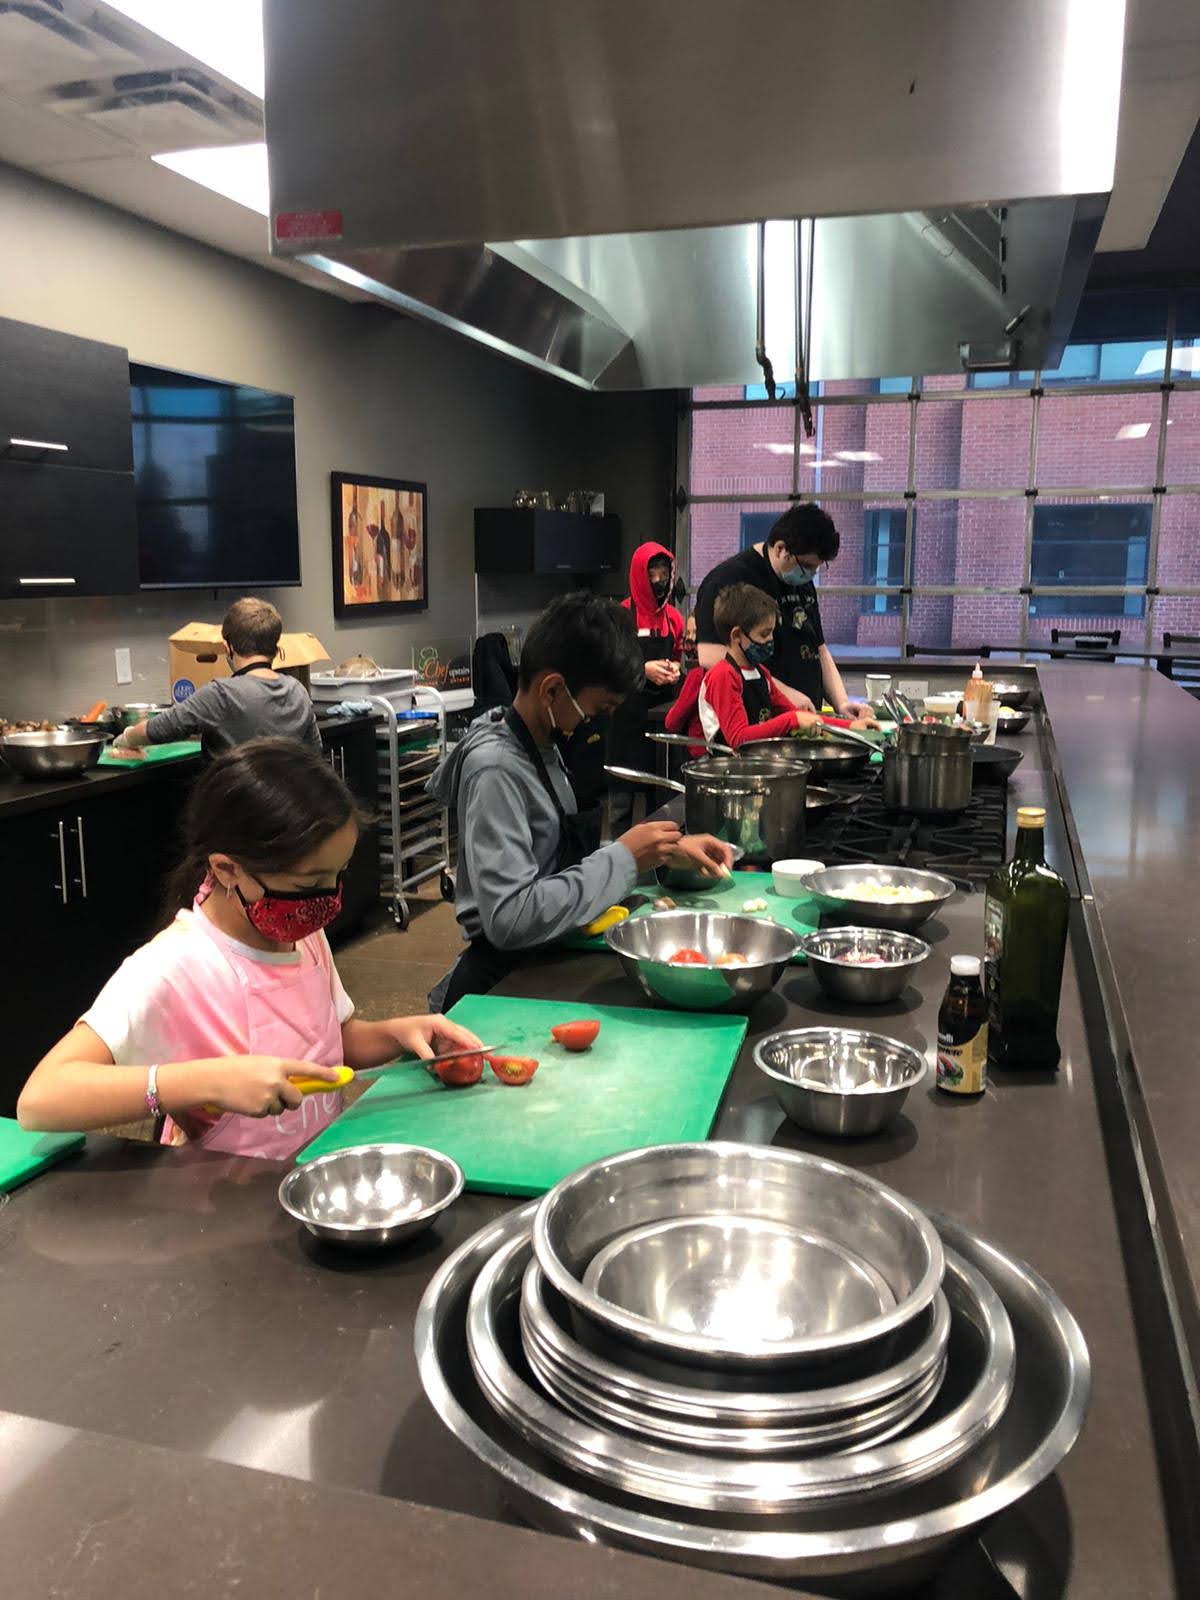 Vaughan - Teen Cooking Classes - 5-week Session from Monday October 4 - Monday November 8